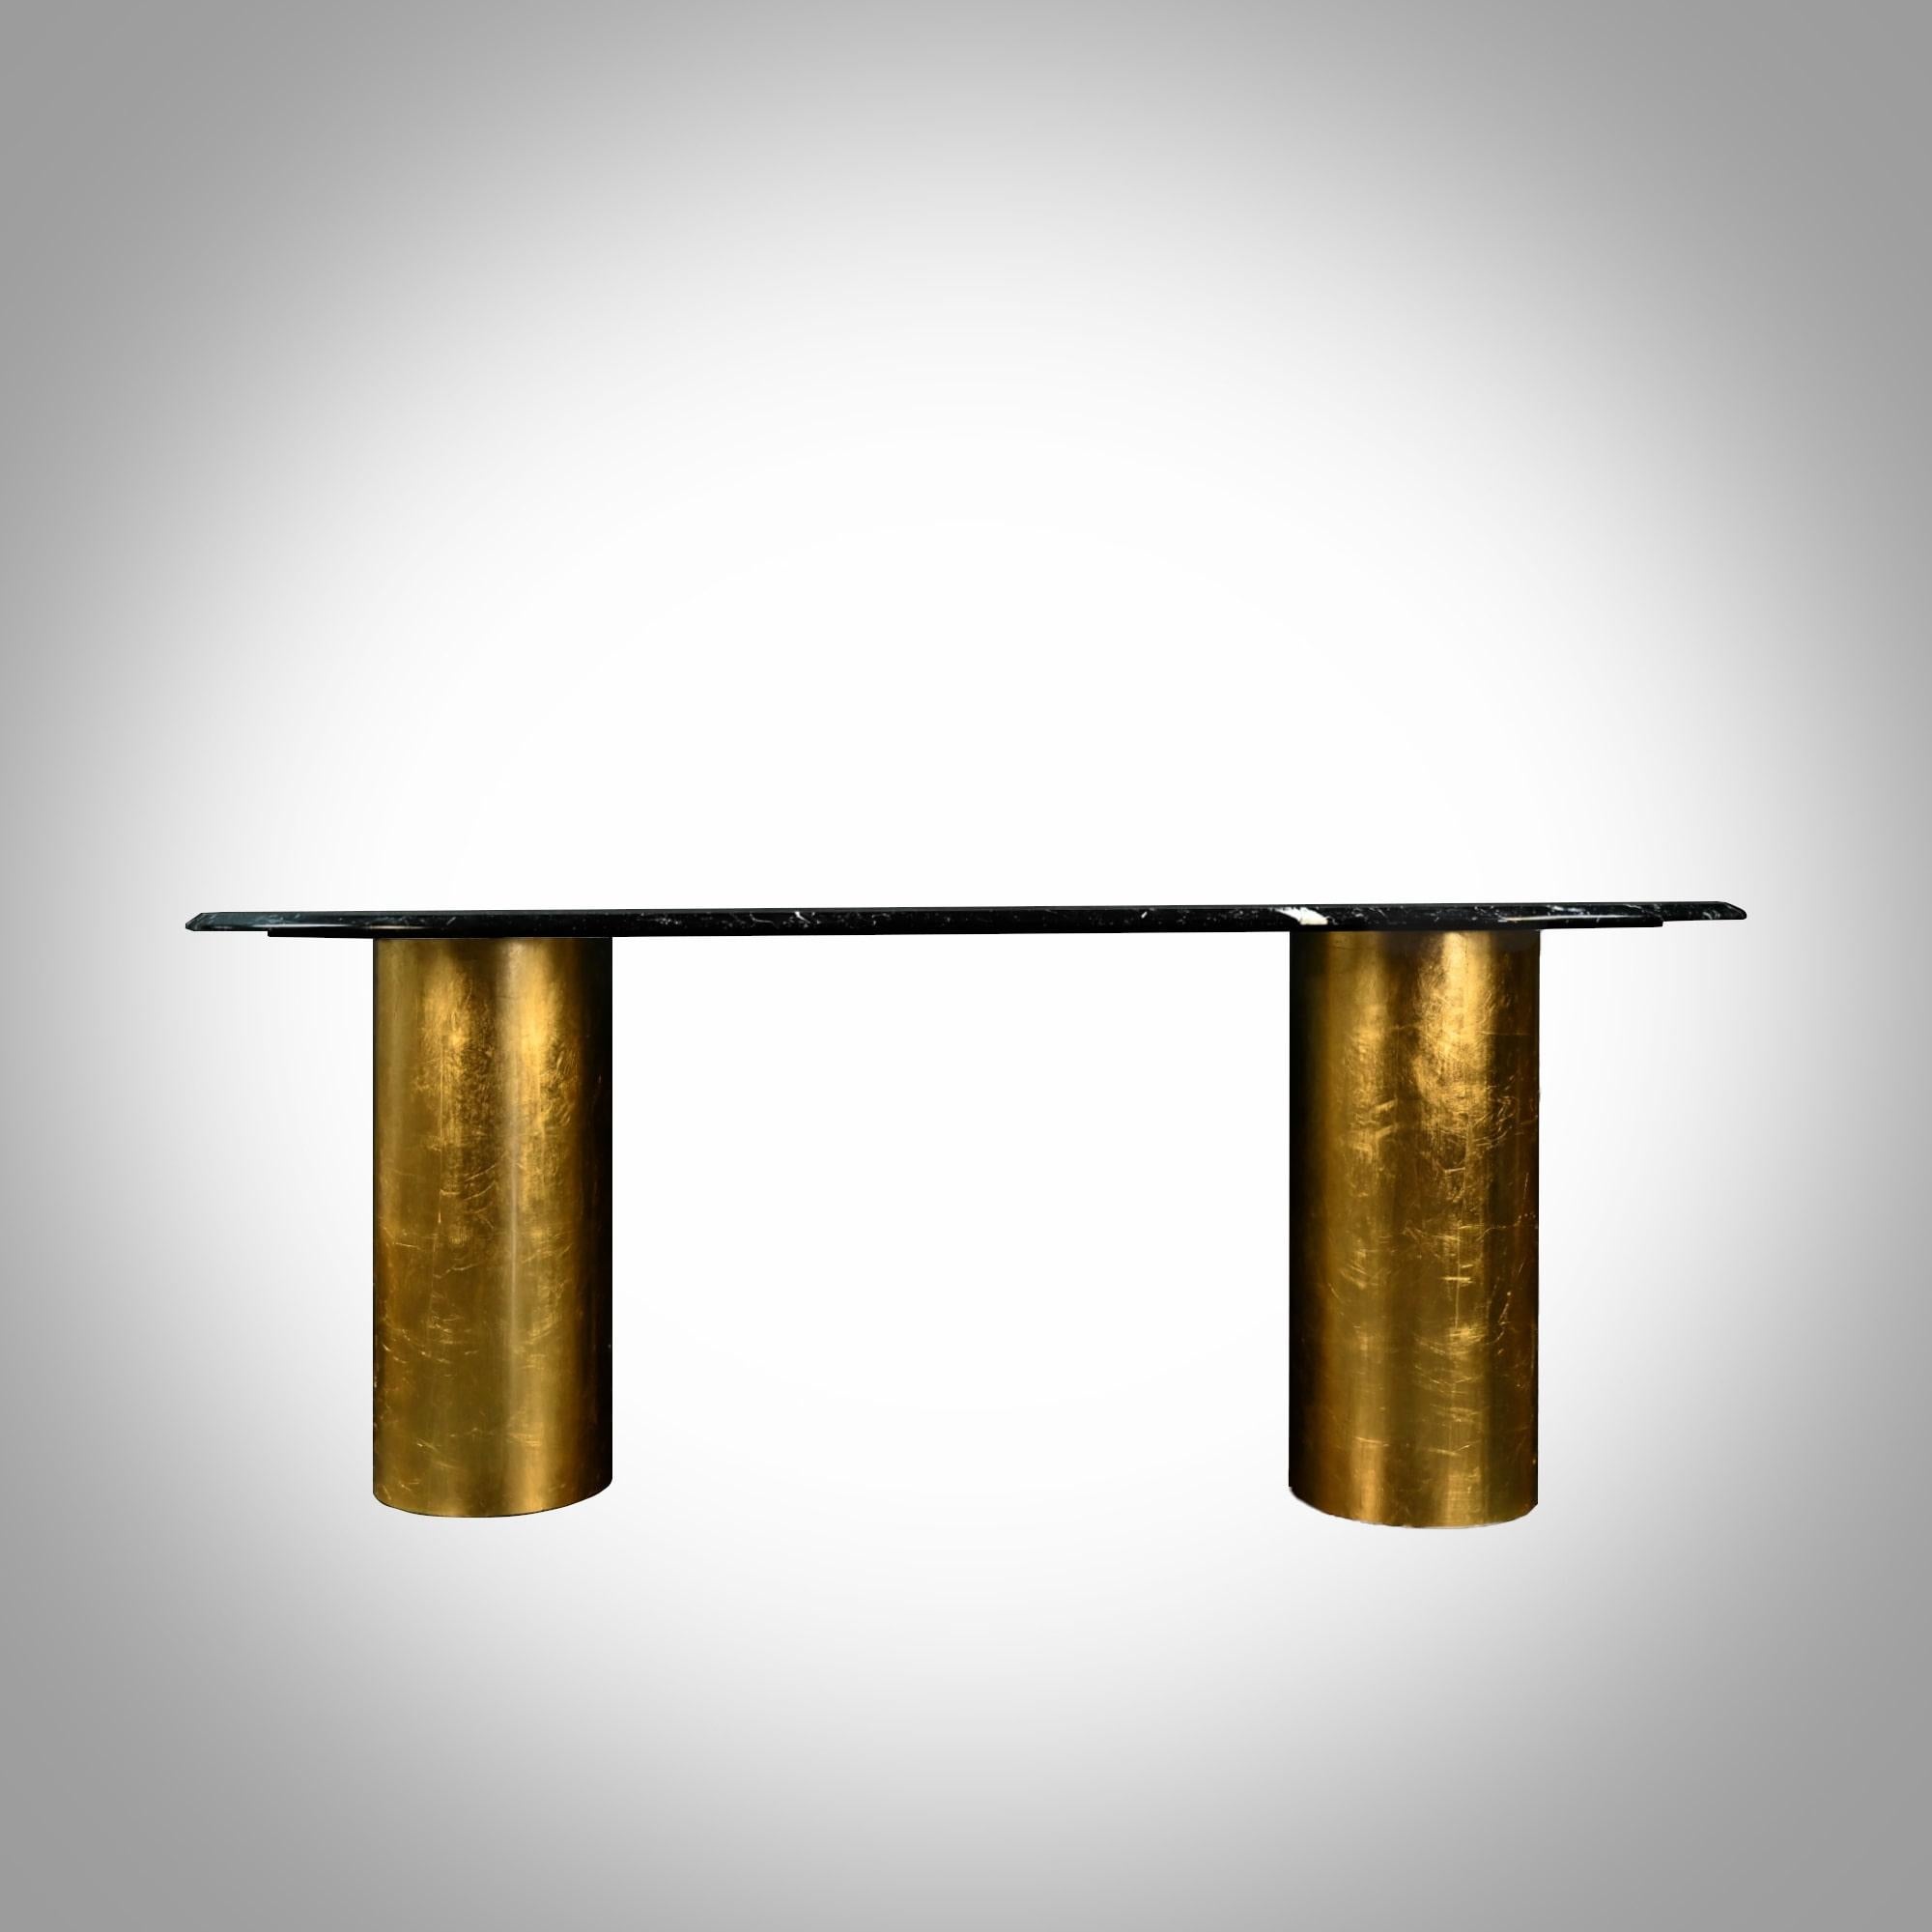 Italian Ovale Nq1, Dining Table Nero Marquinia Marble and Gold Leaf by Dfdesignlab For Sale